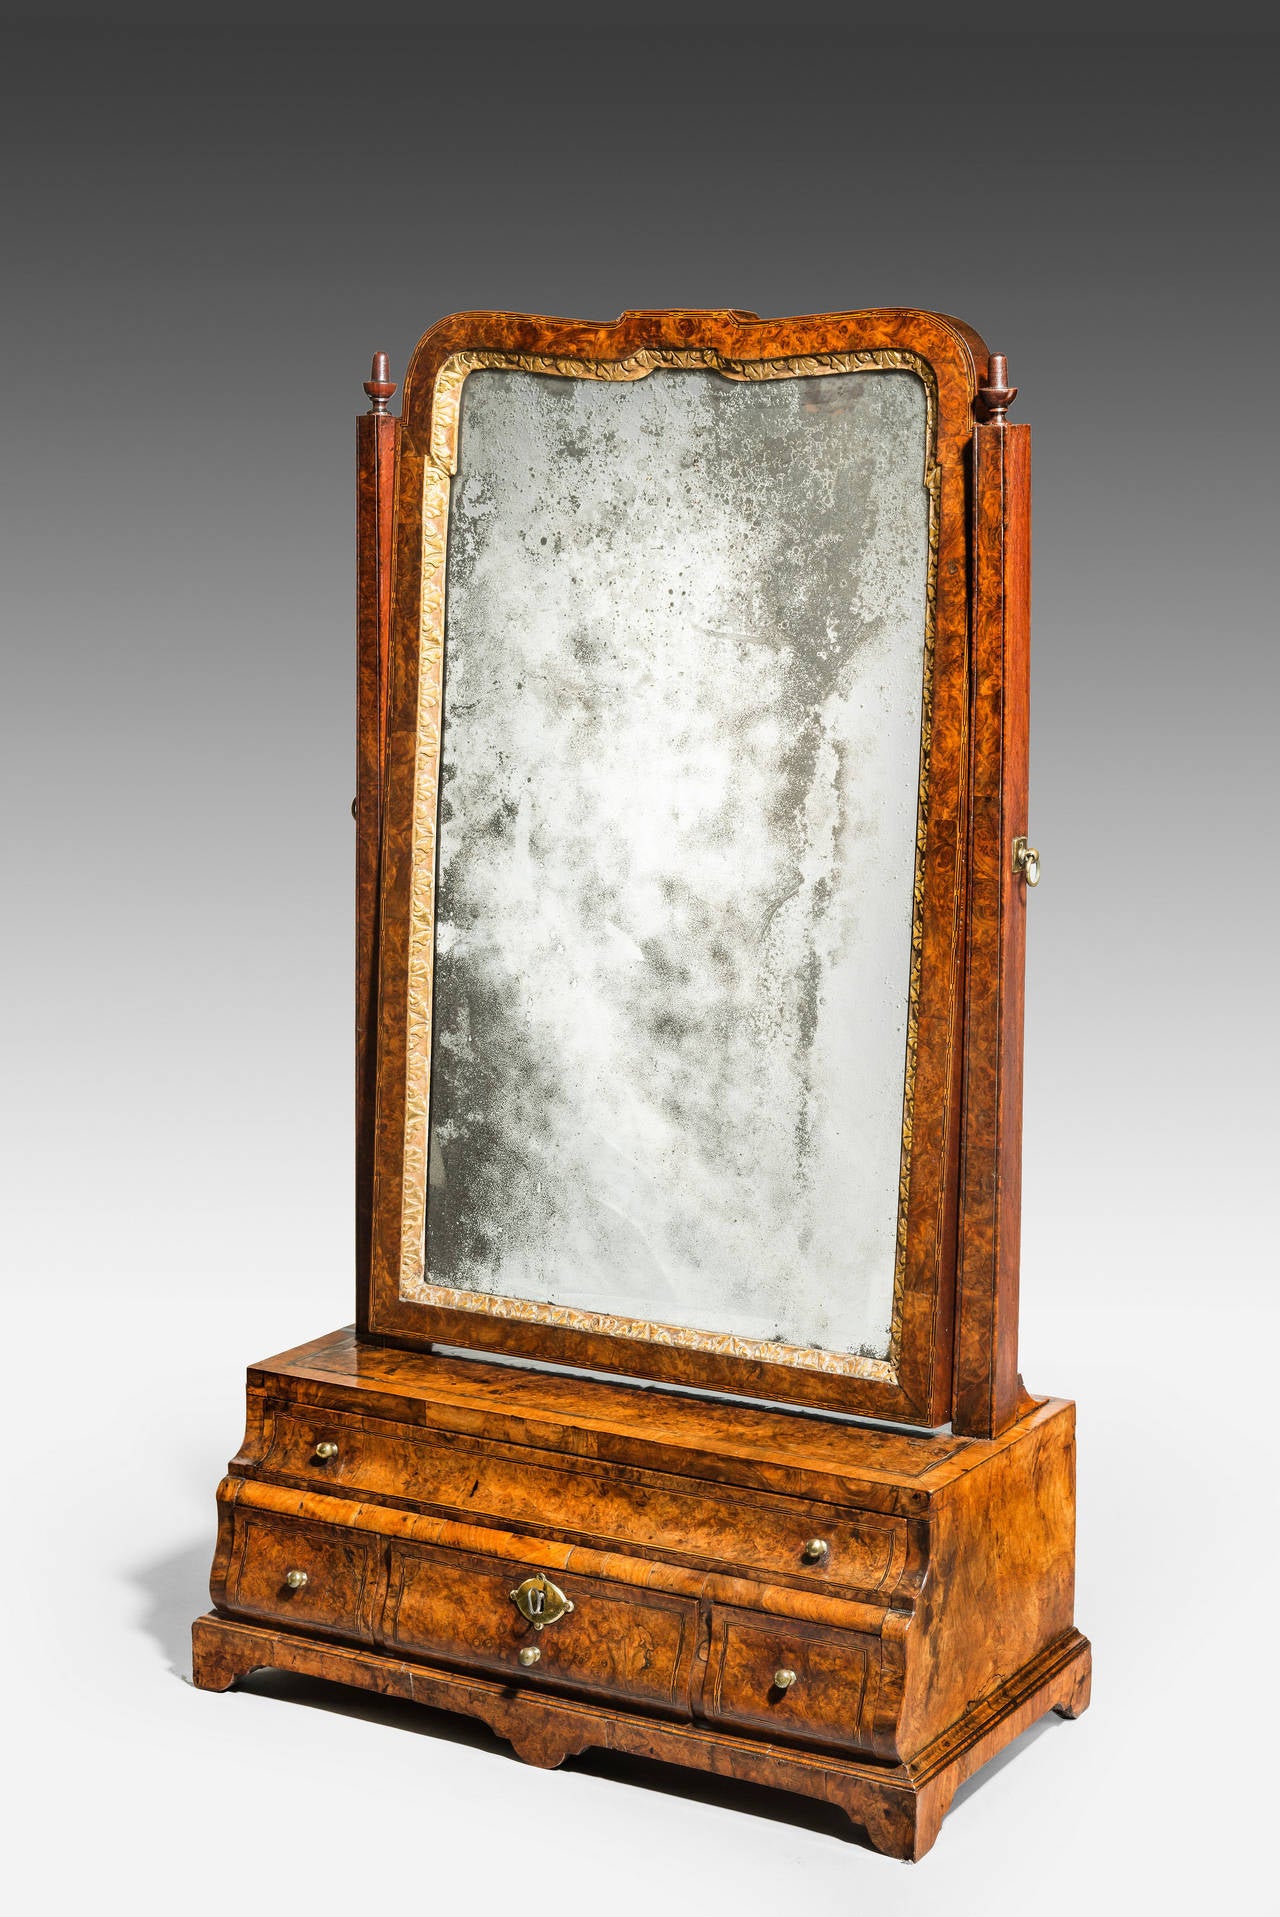 Provenance: Slebech Hall, Pembrokeshire.

In burr walnut. With the original bevelled rectangular glass set in a shaped and moulded mirror frame with a gilded carved inner slip. The square upright supports topped with replaced carved finials, and